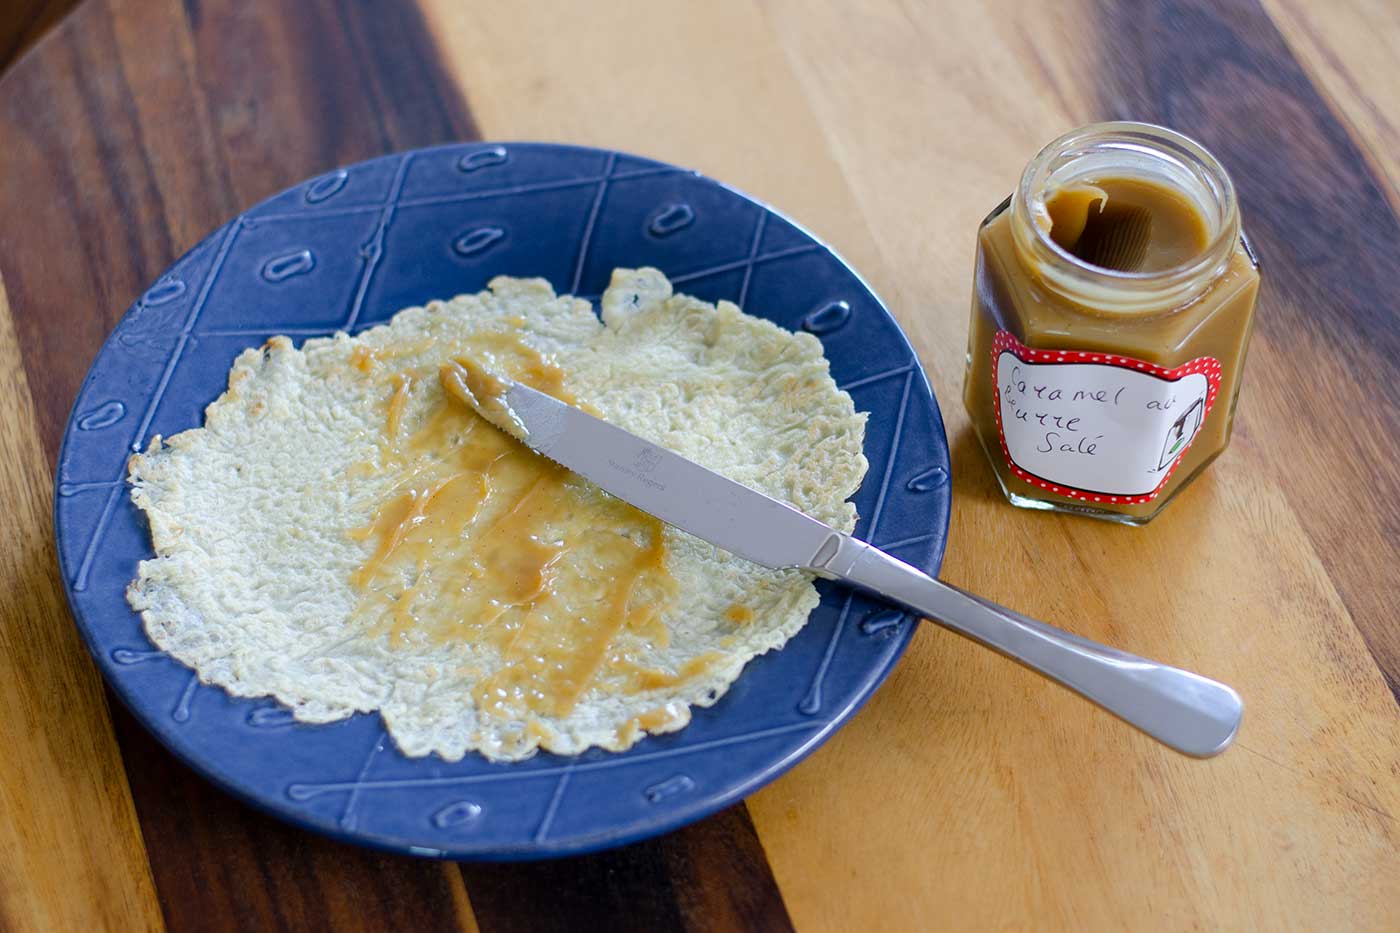 Crêpes-with-Salted-Butter-Caramel-Sauce-Thermomix-Recipe